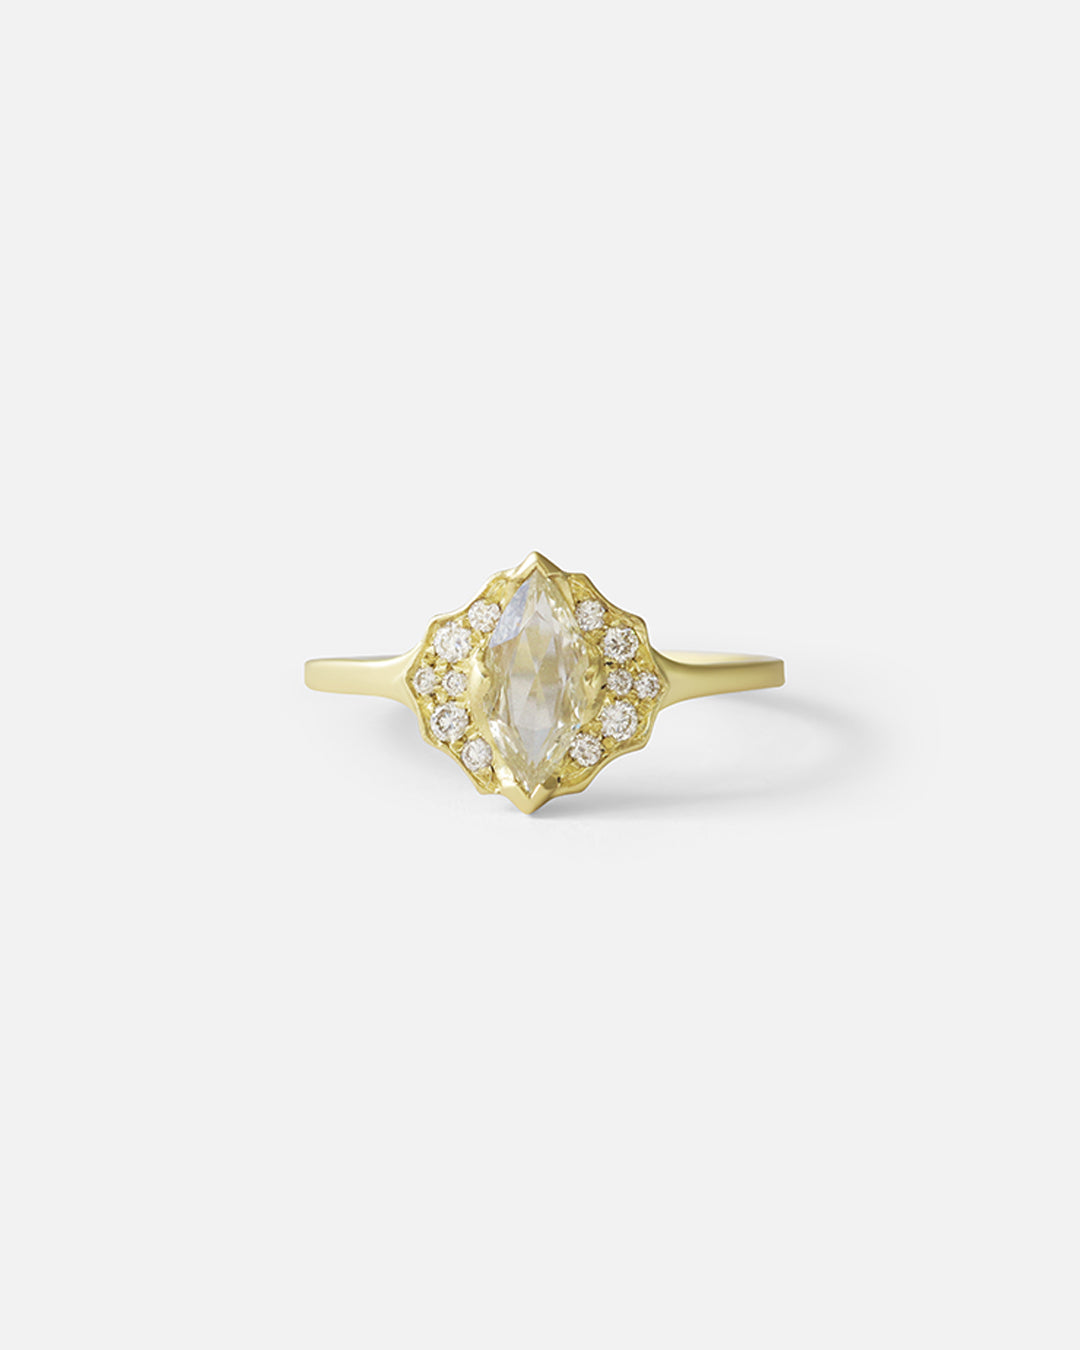 Zaida Ring By Hiroyo in Engagement Rings Category